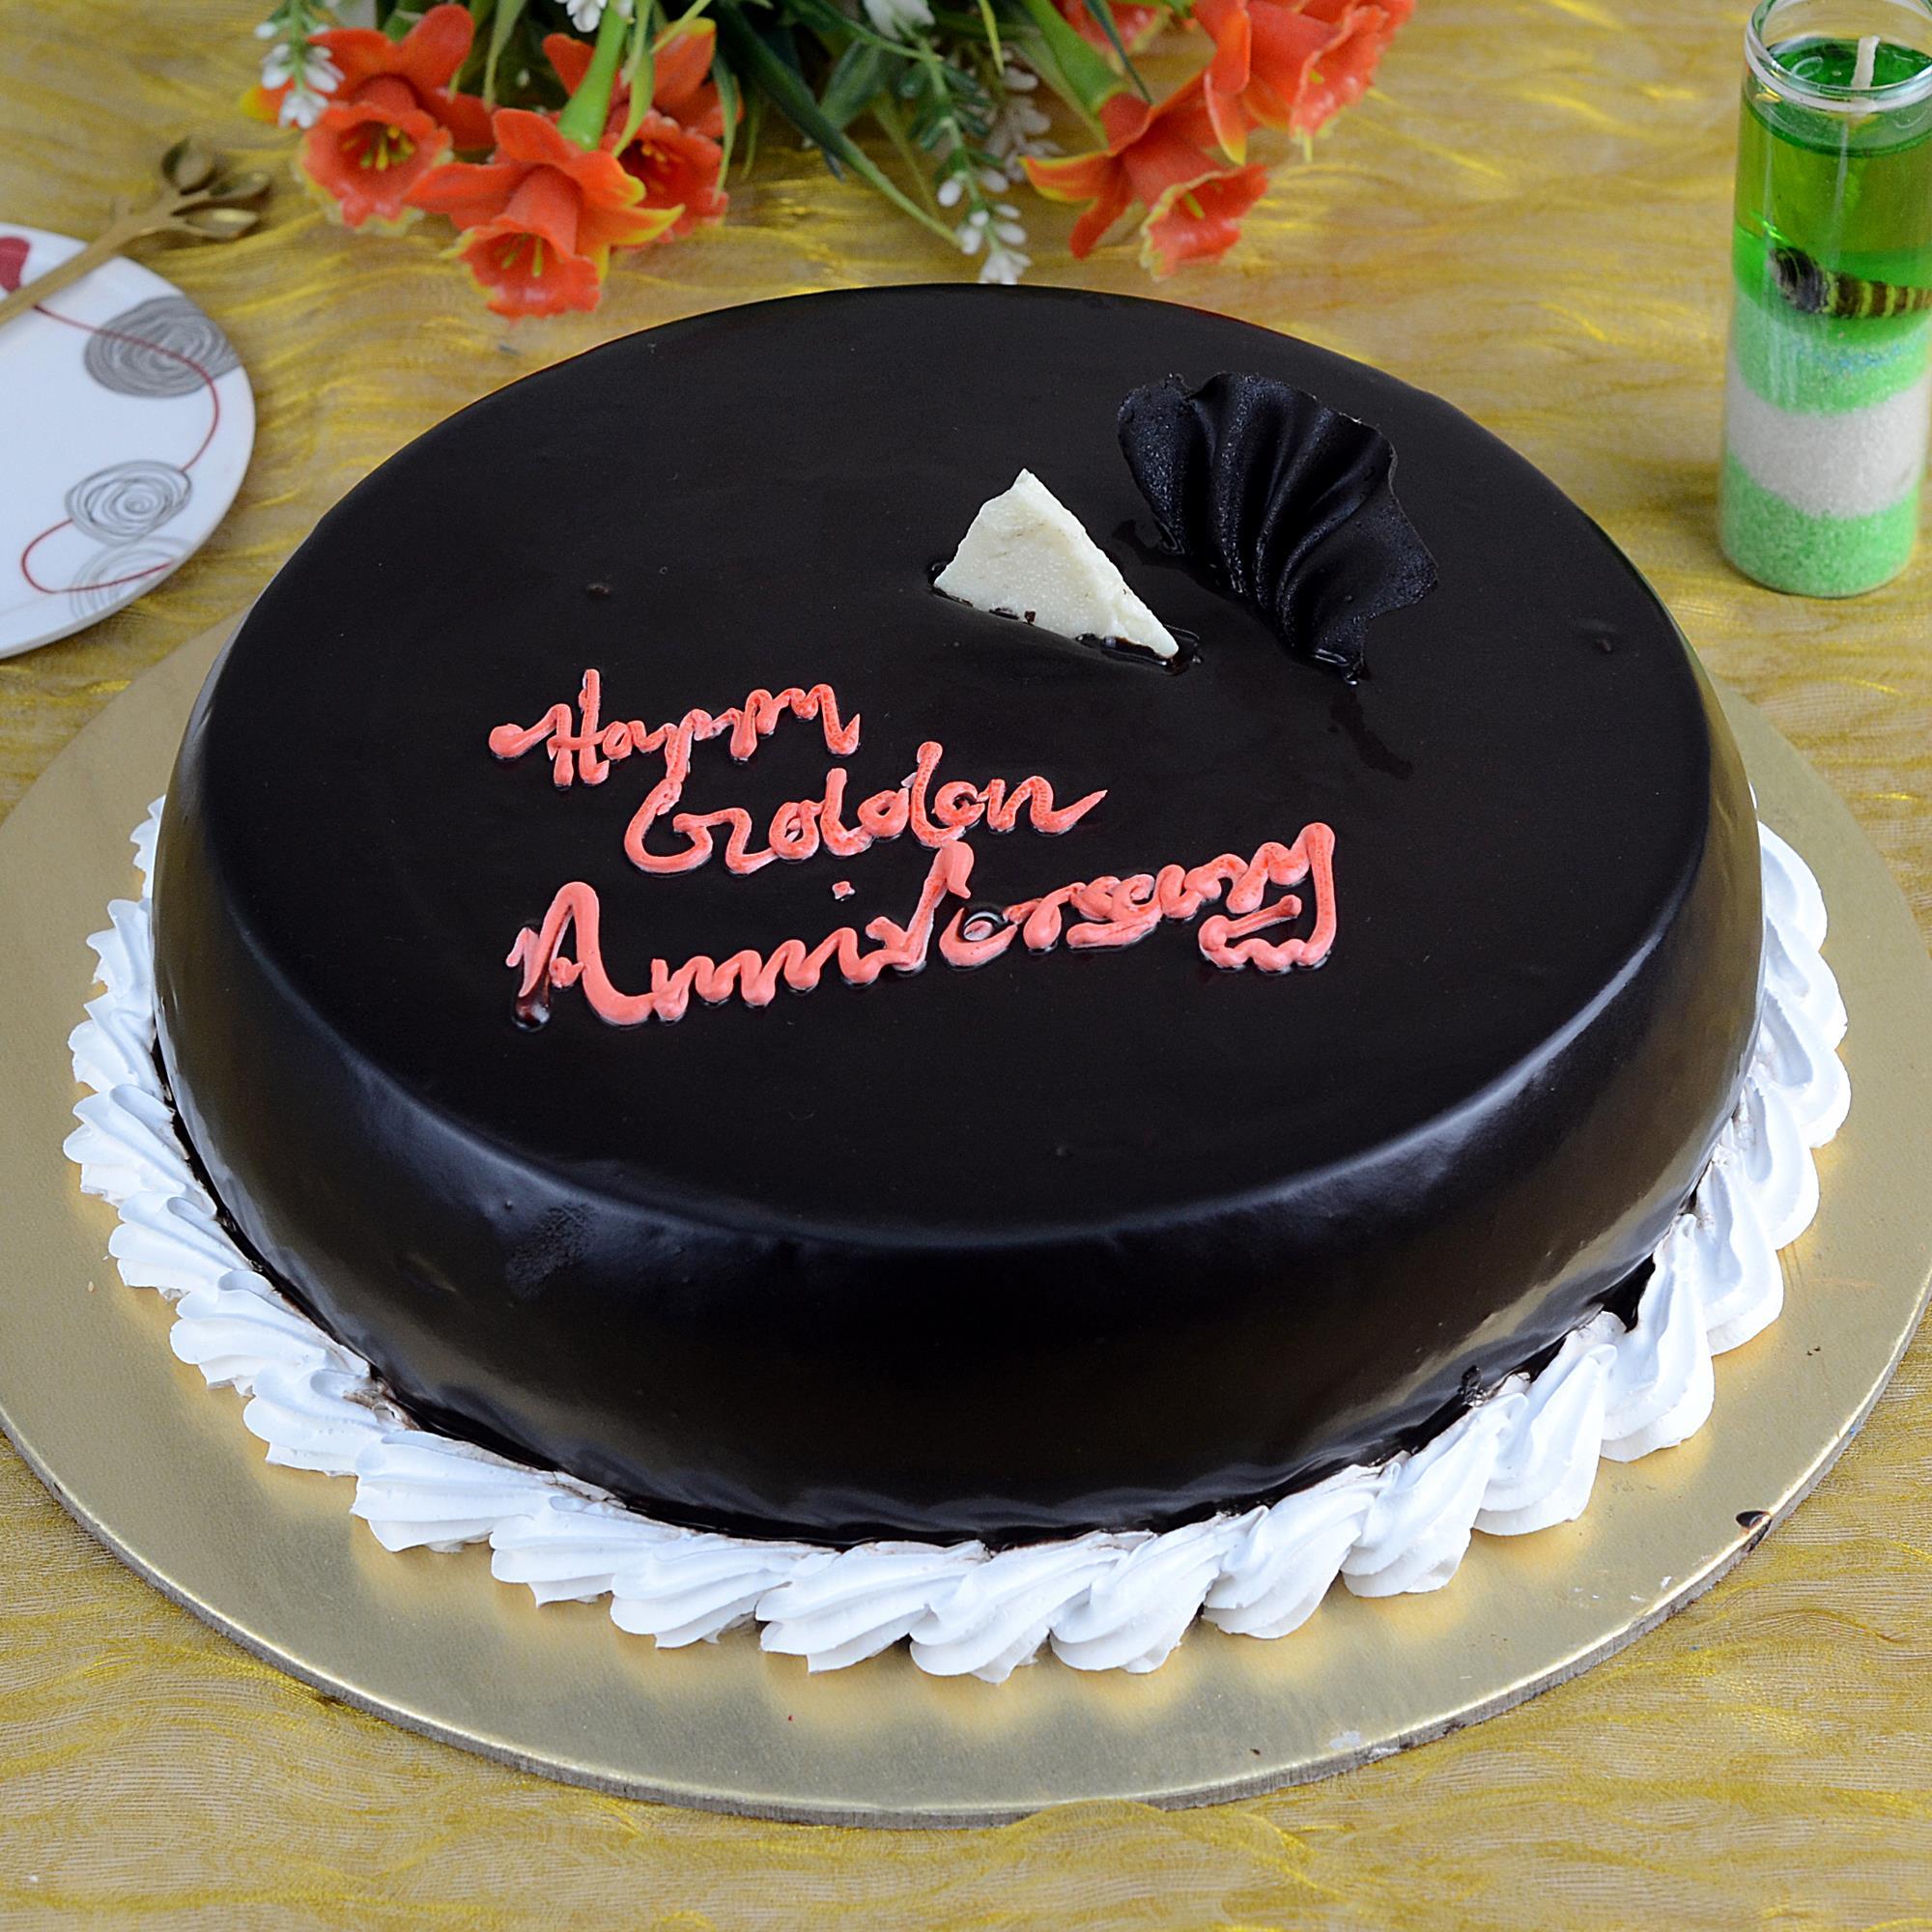 How To Design A Wedding Anniversary Cake NJ For Parents